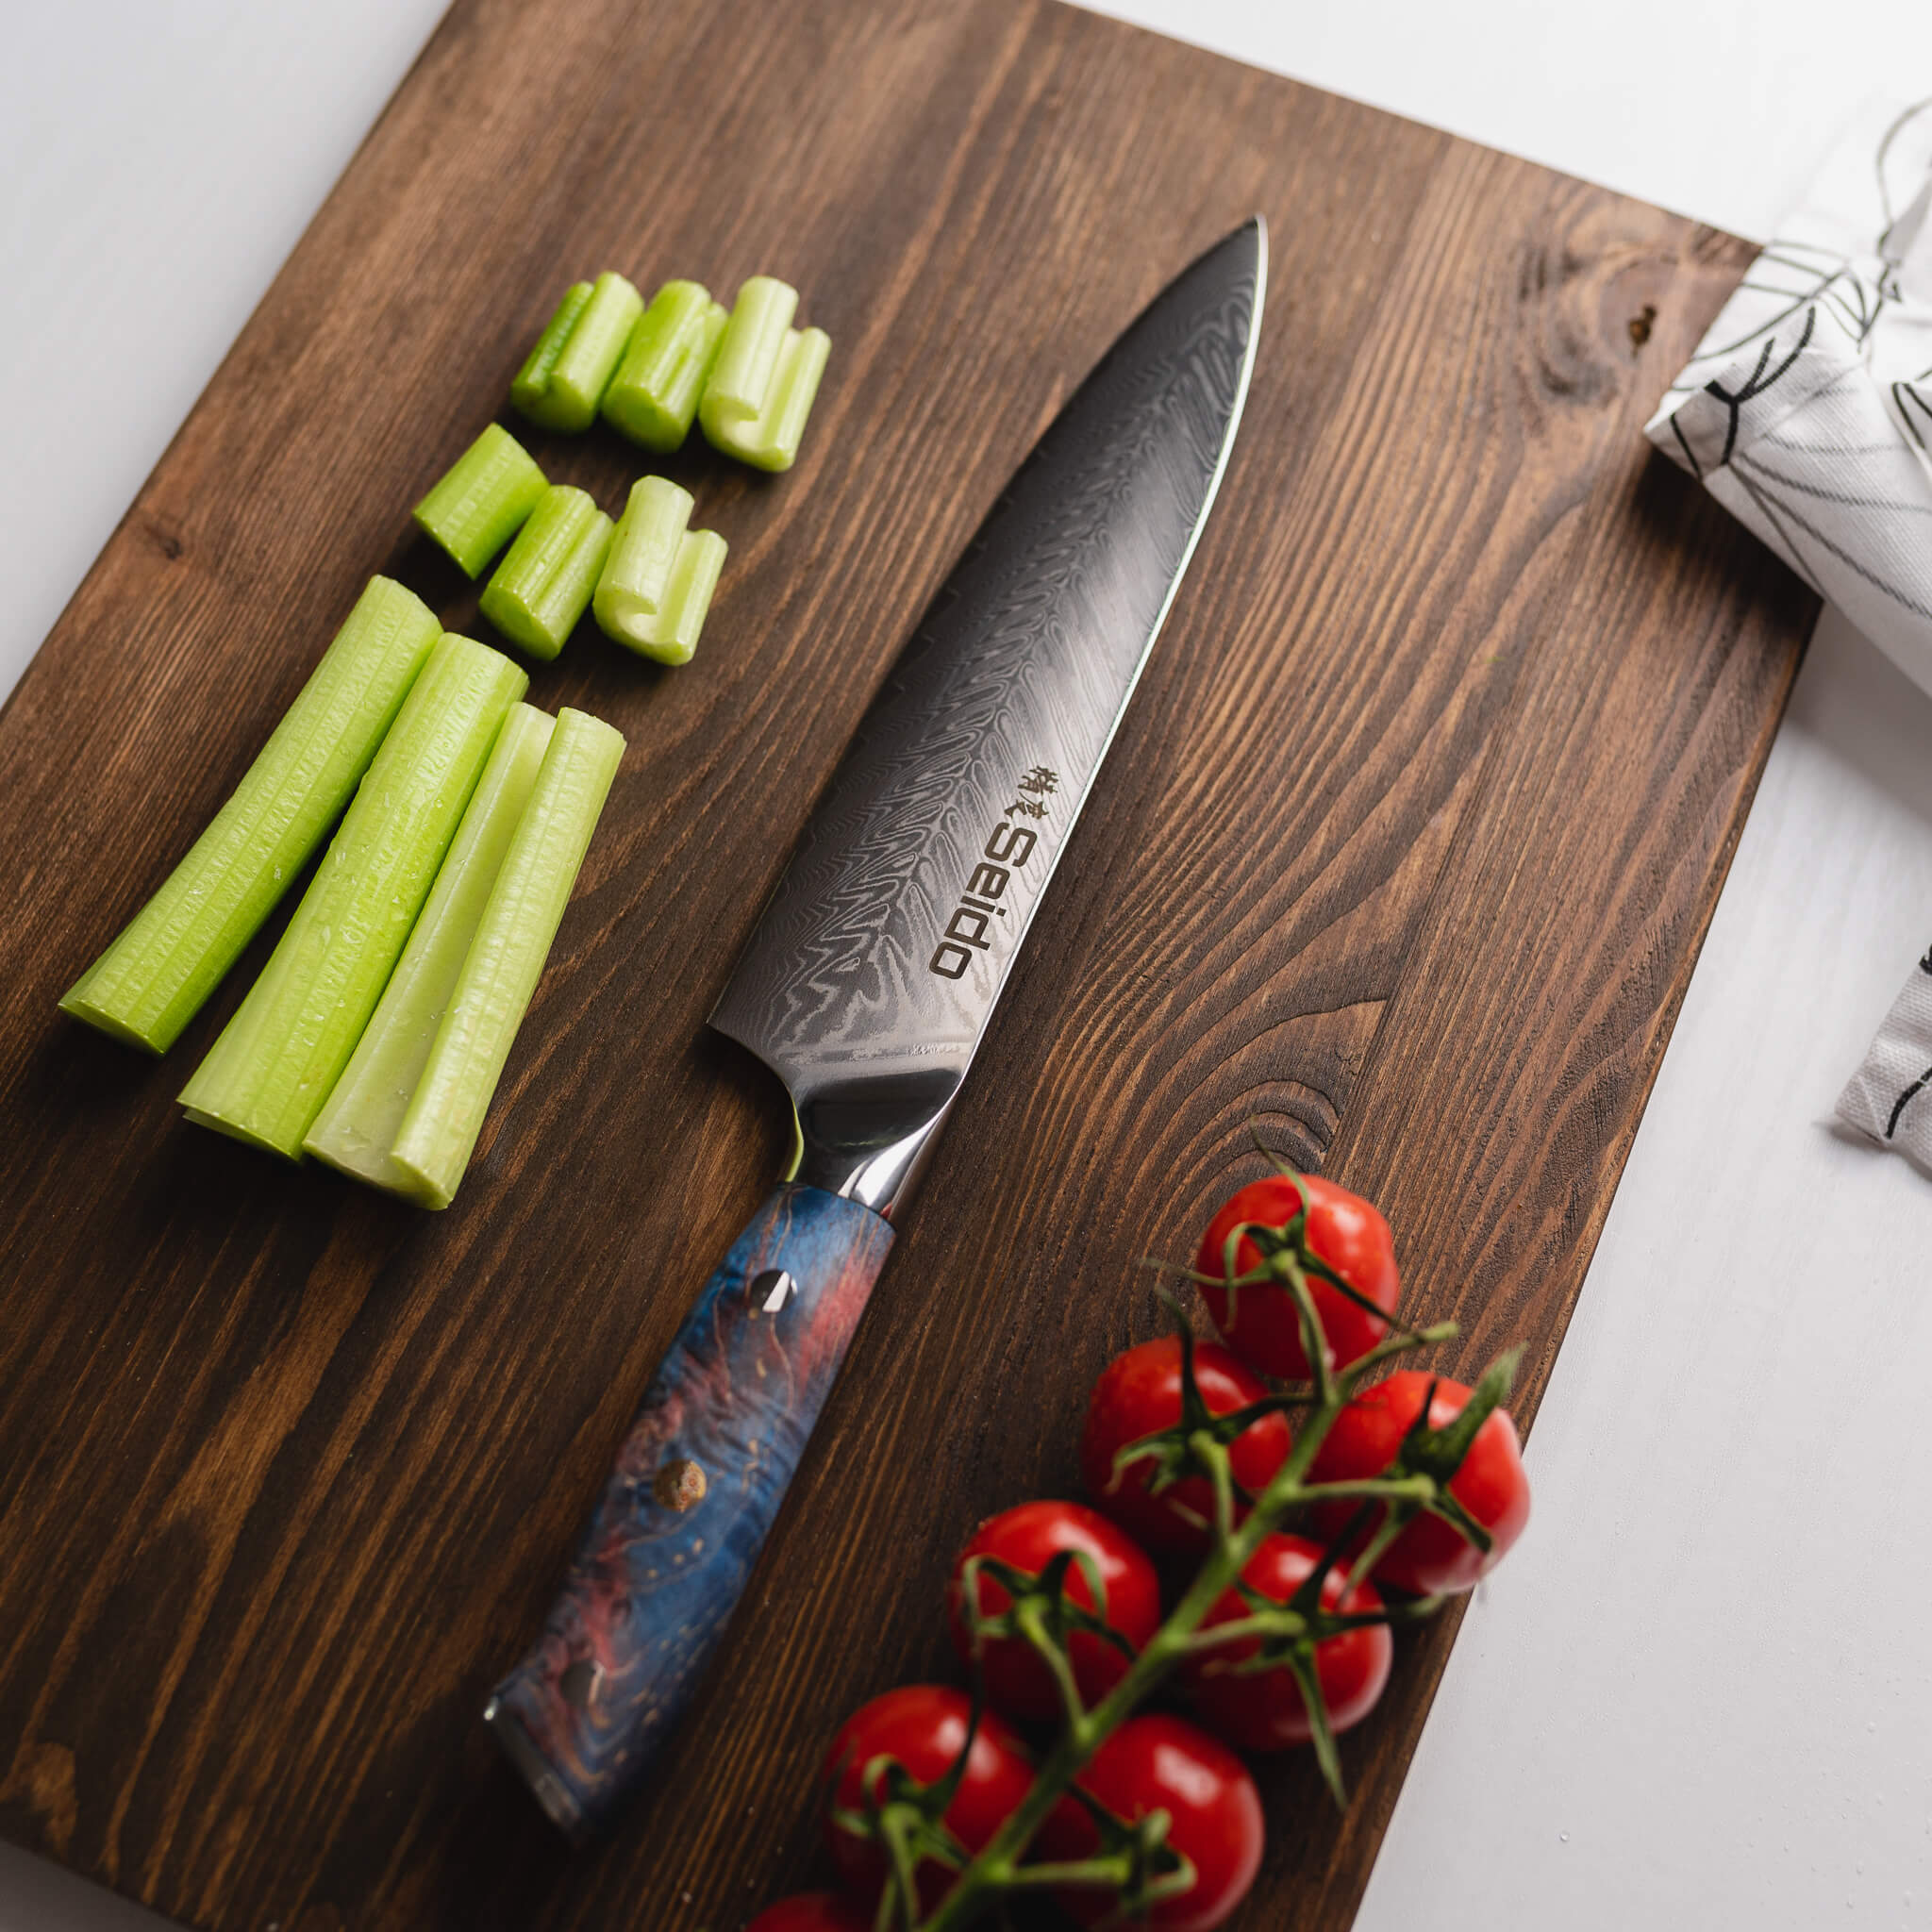 A sharp Katsuryoku Gyuto Chef Knife from Seido Knives skillfully slices through fresh vegetables on a cutting board.